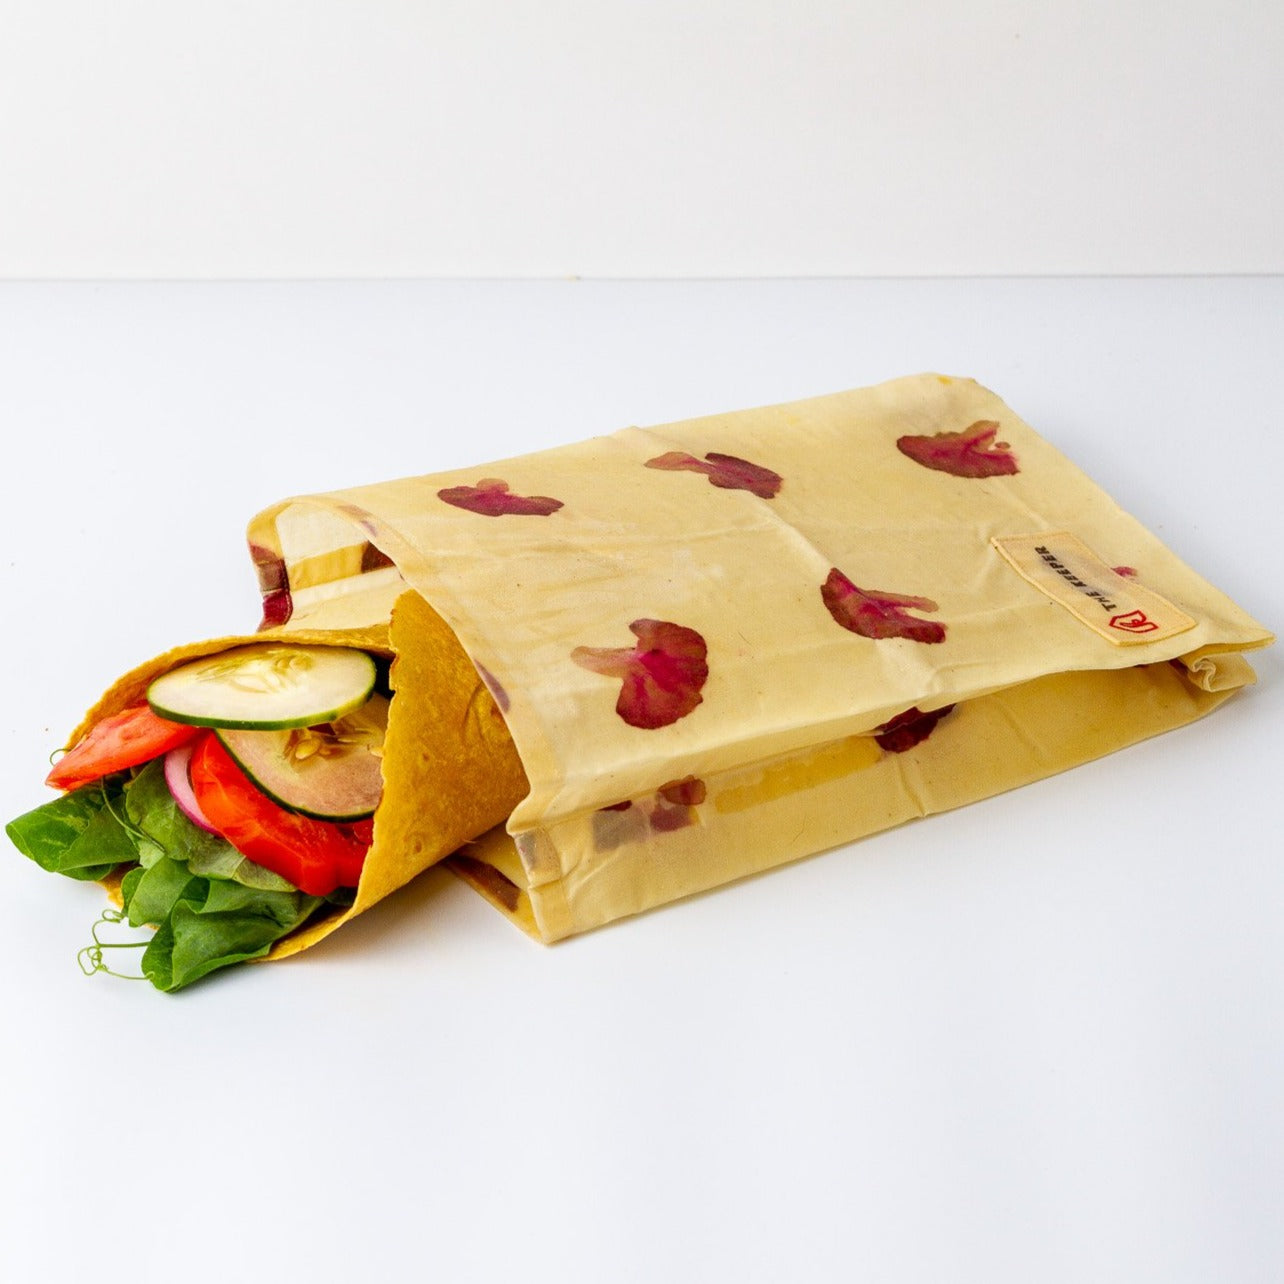 Waxed lunch bag - The Keeper